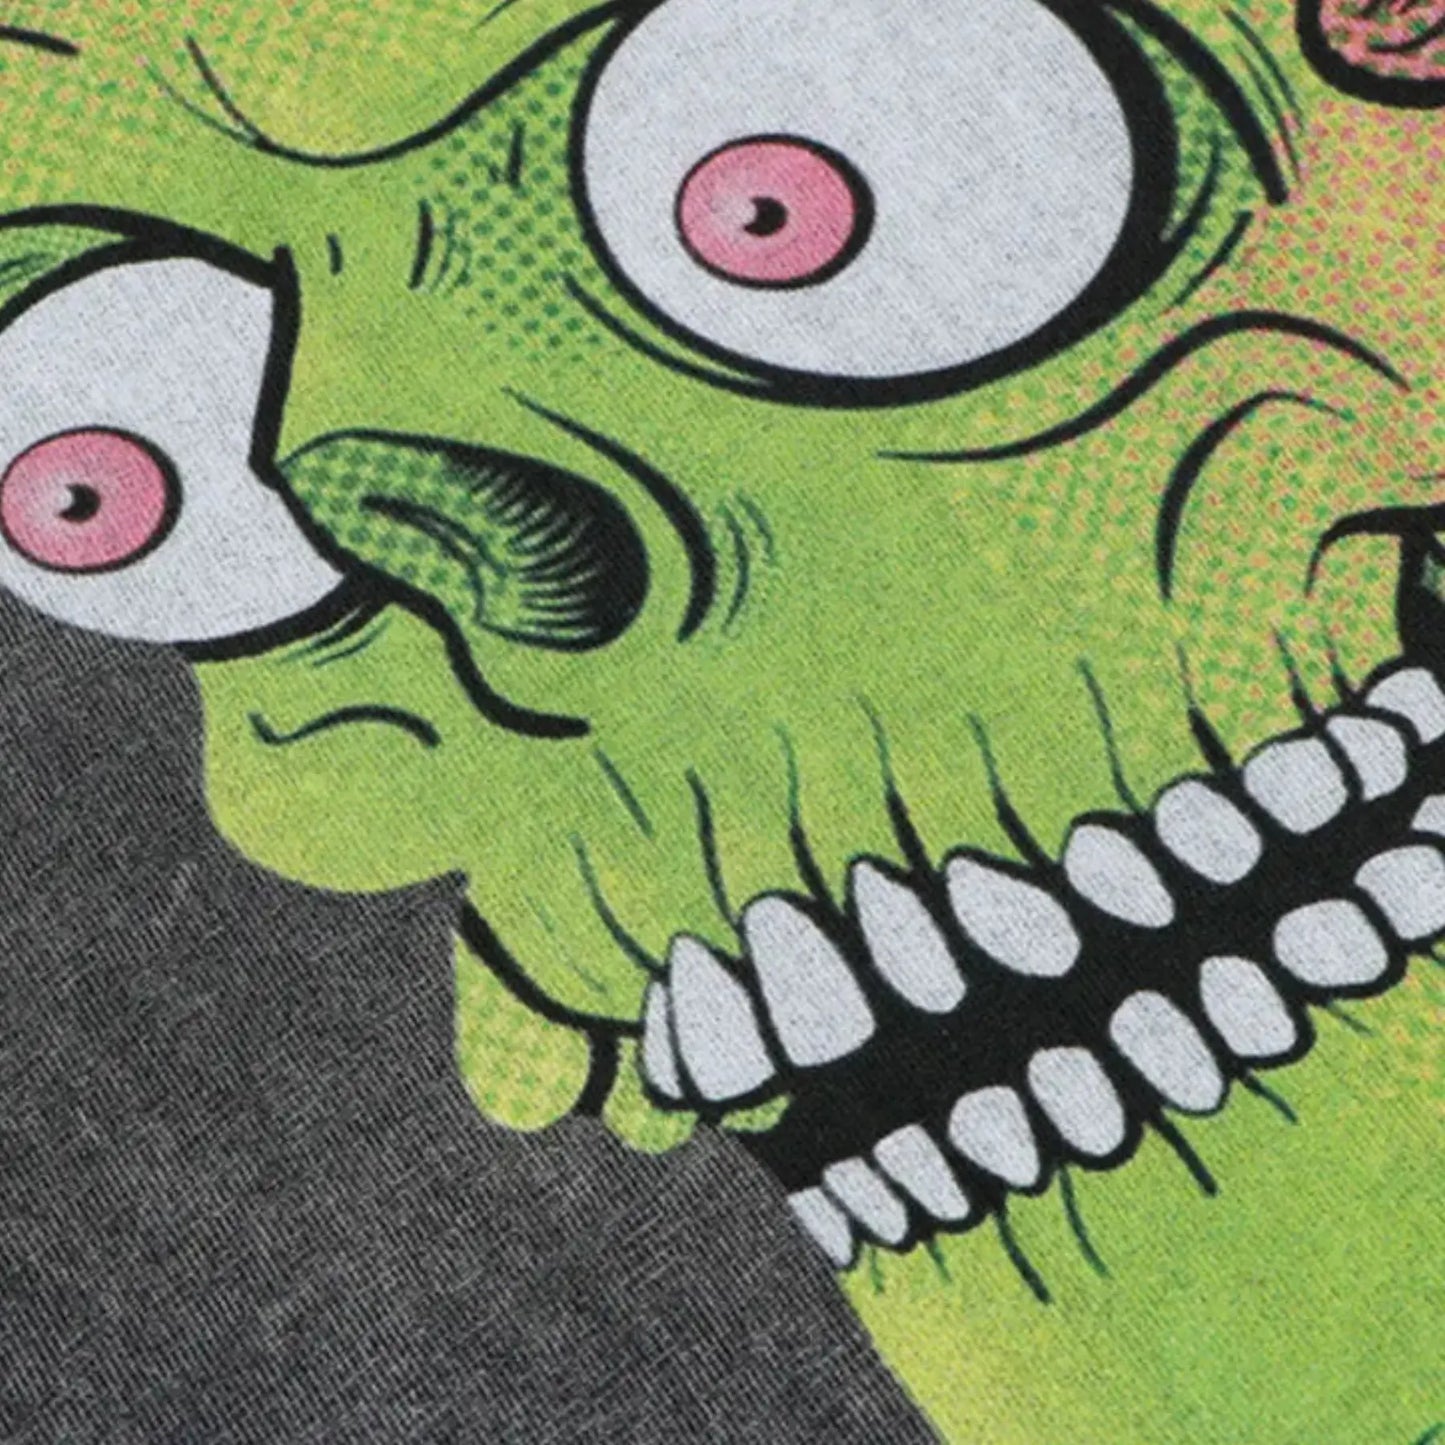 Washed Zombie Skull Printed Tee